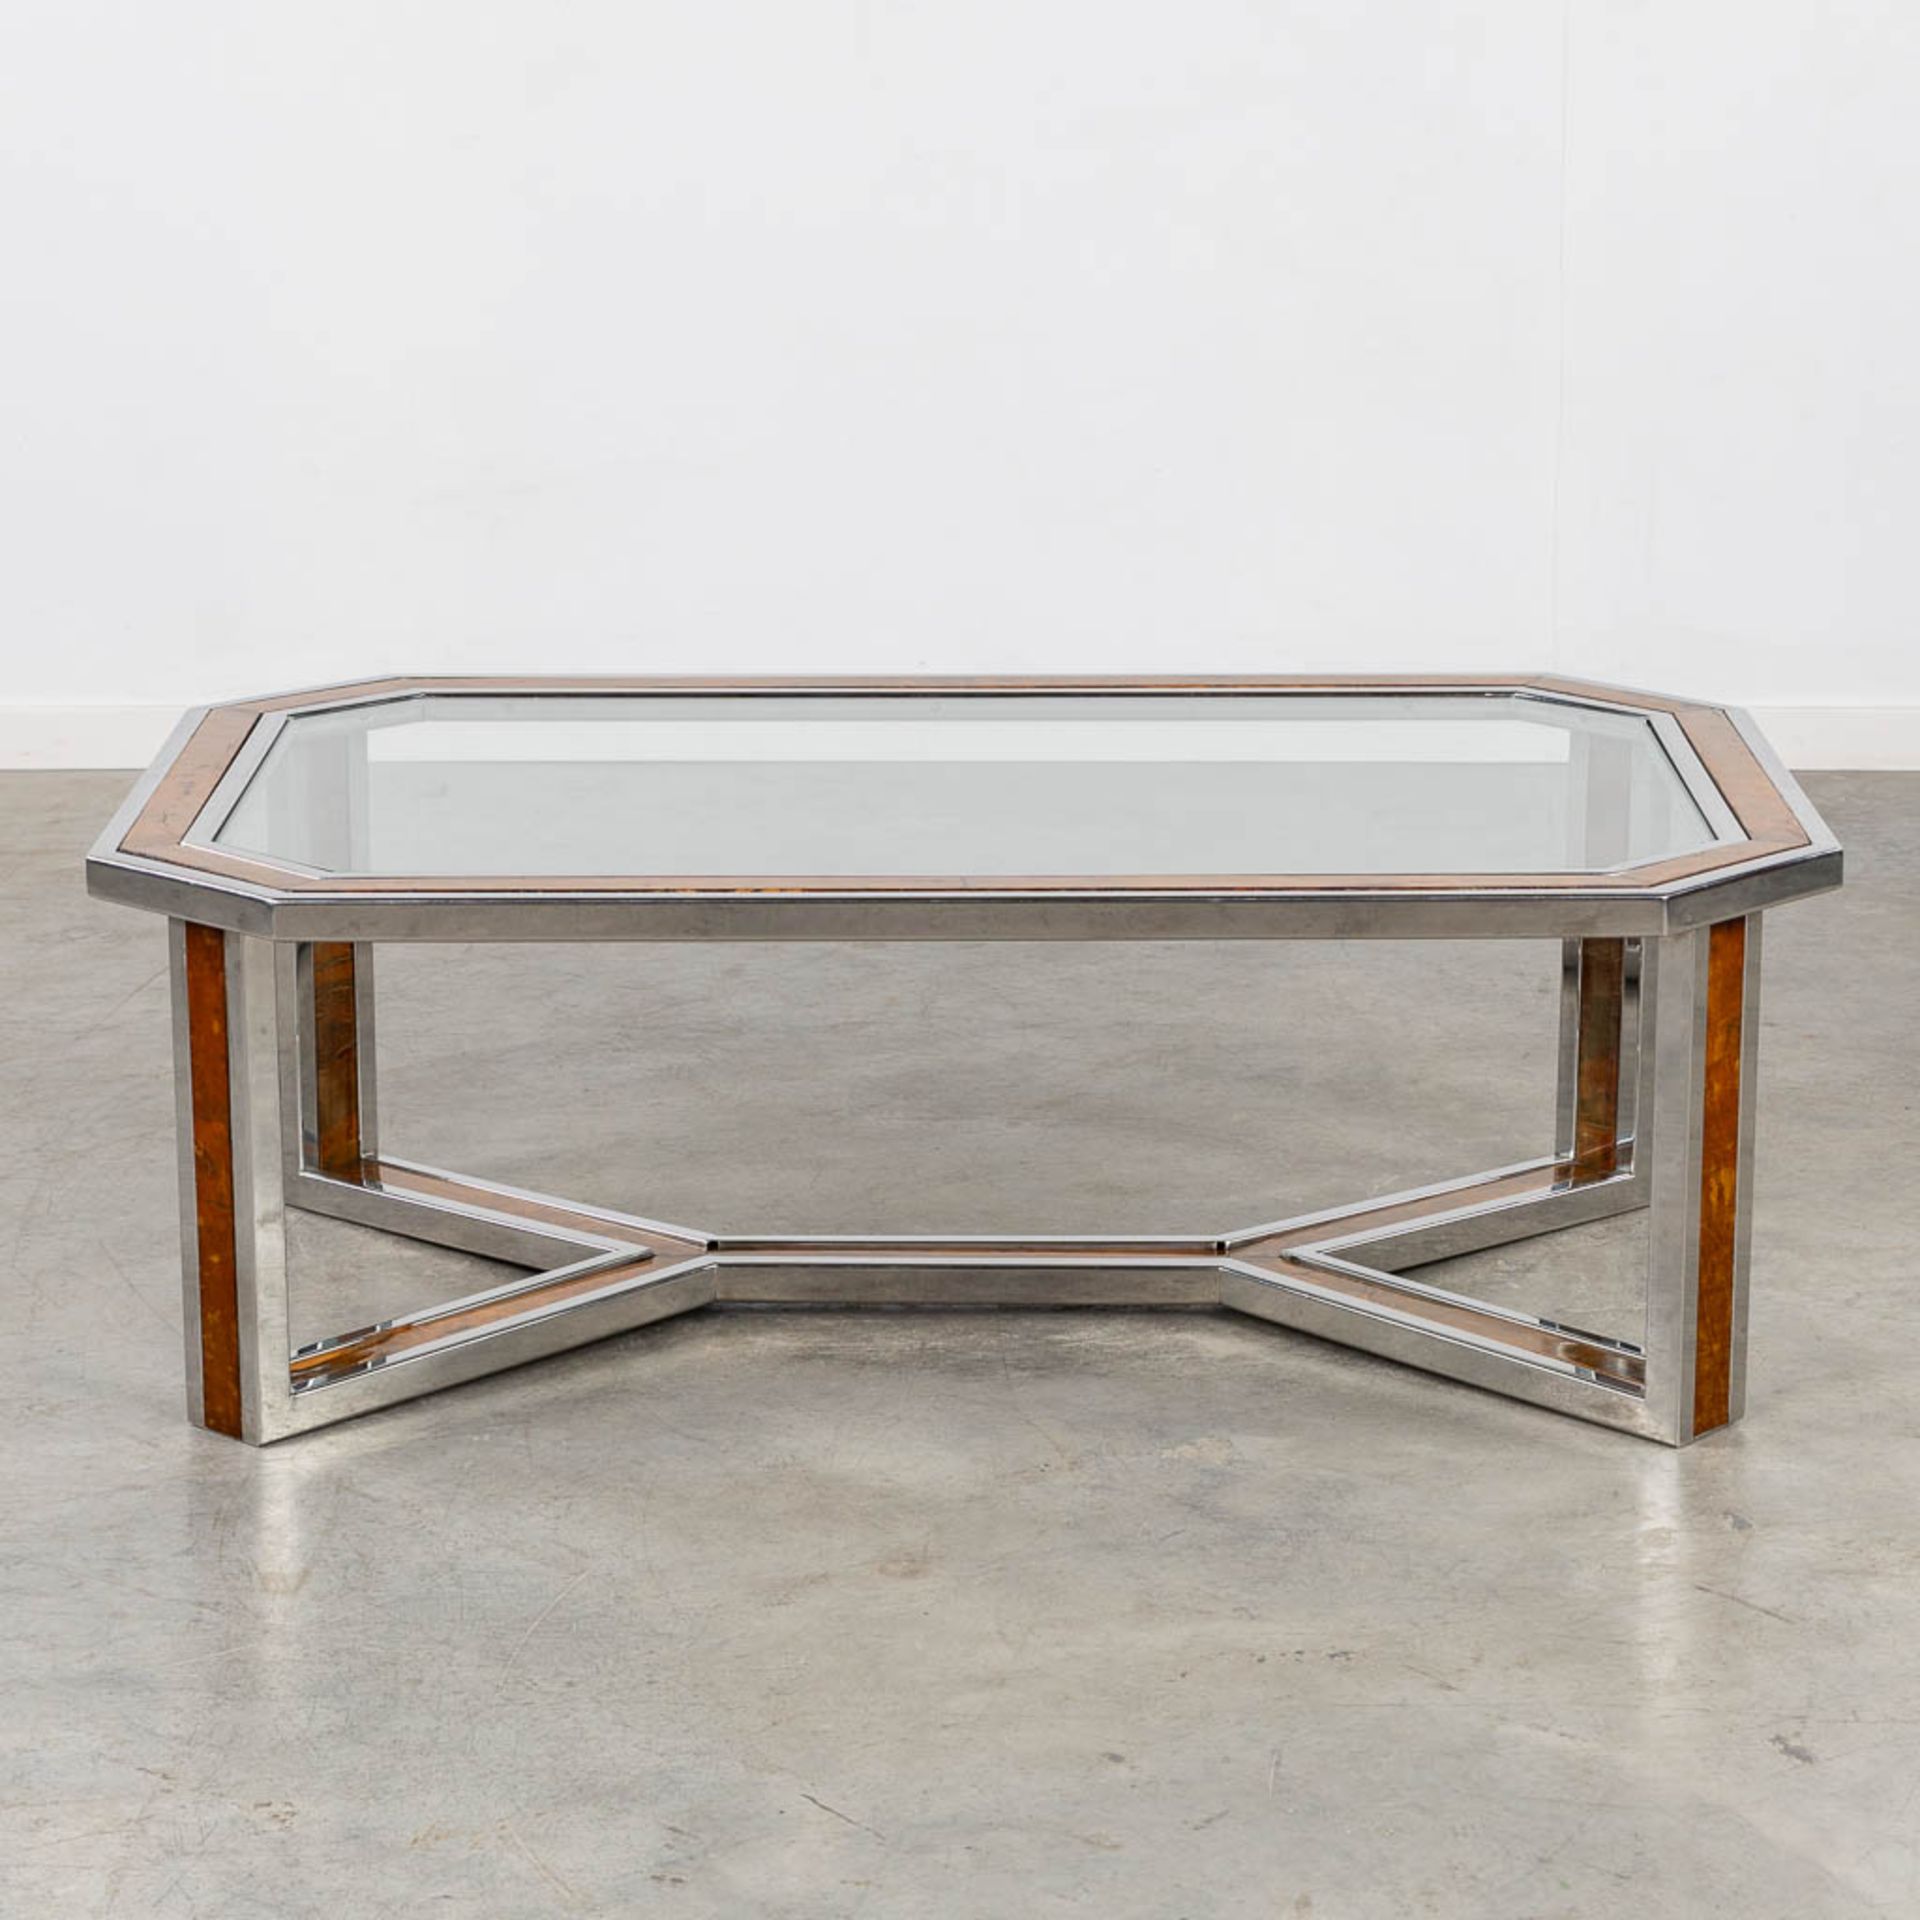 A coffee table, chrome with a faux wood inlay and a glass top. (L:80 x W:120 x H:40 cm) - Image 3 of 10